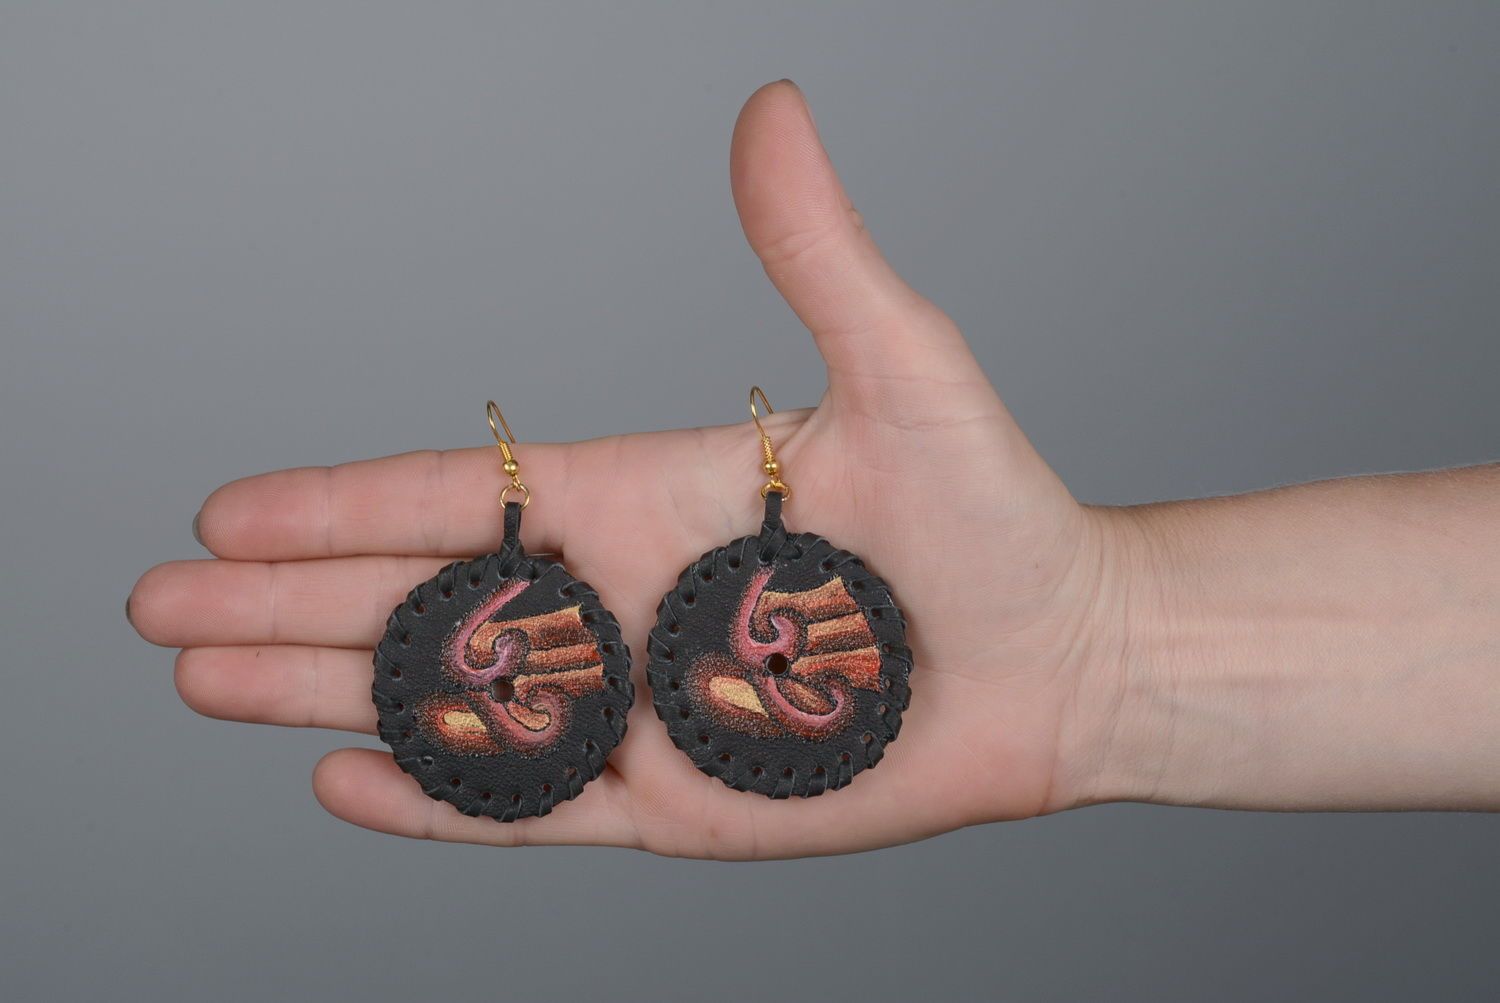 Round earrings made of leather photo 5